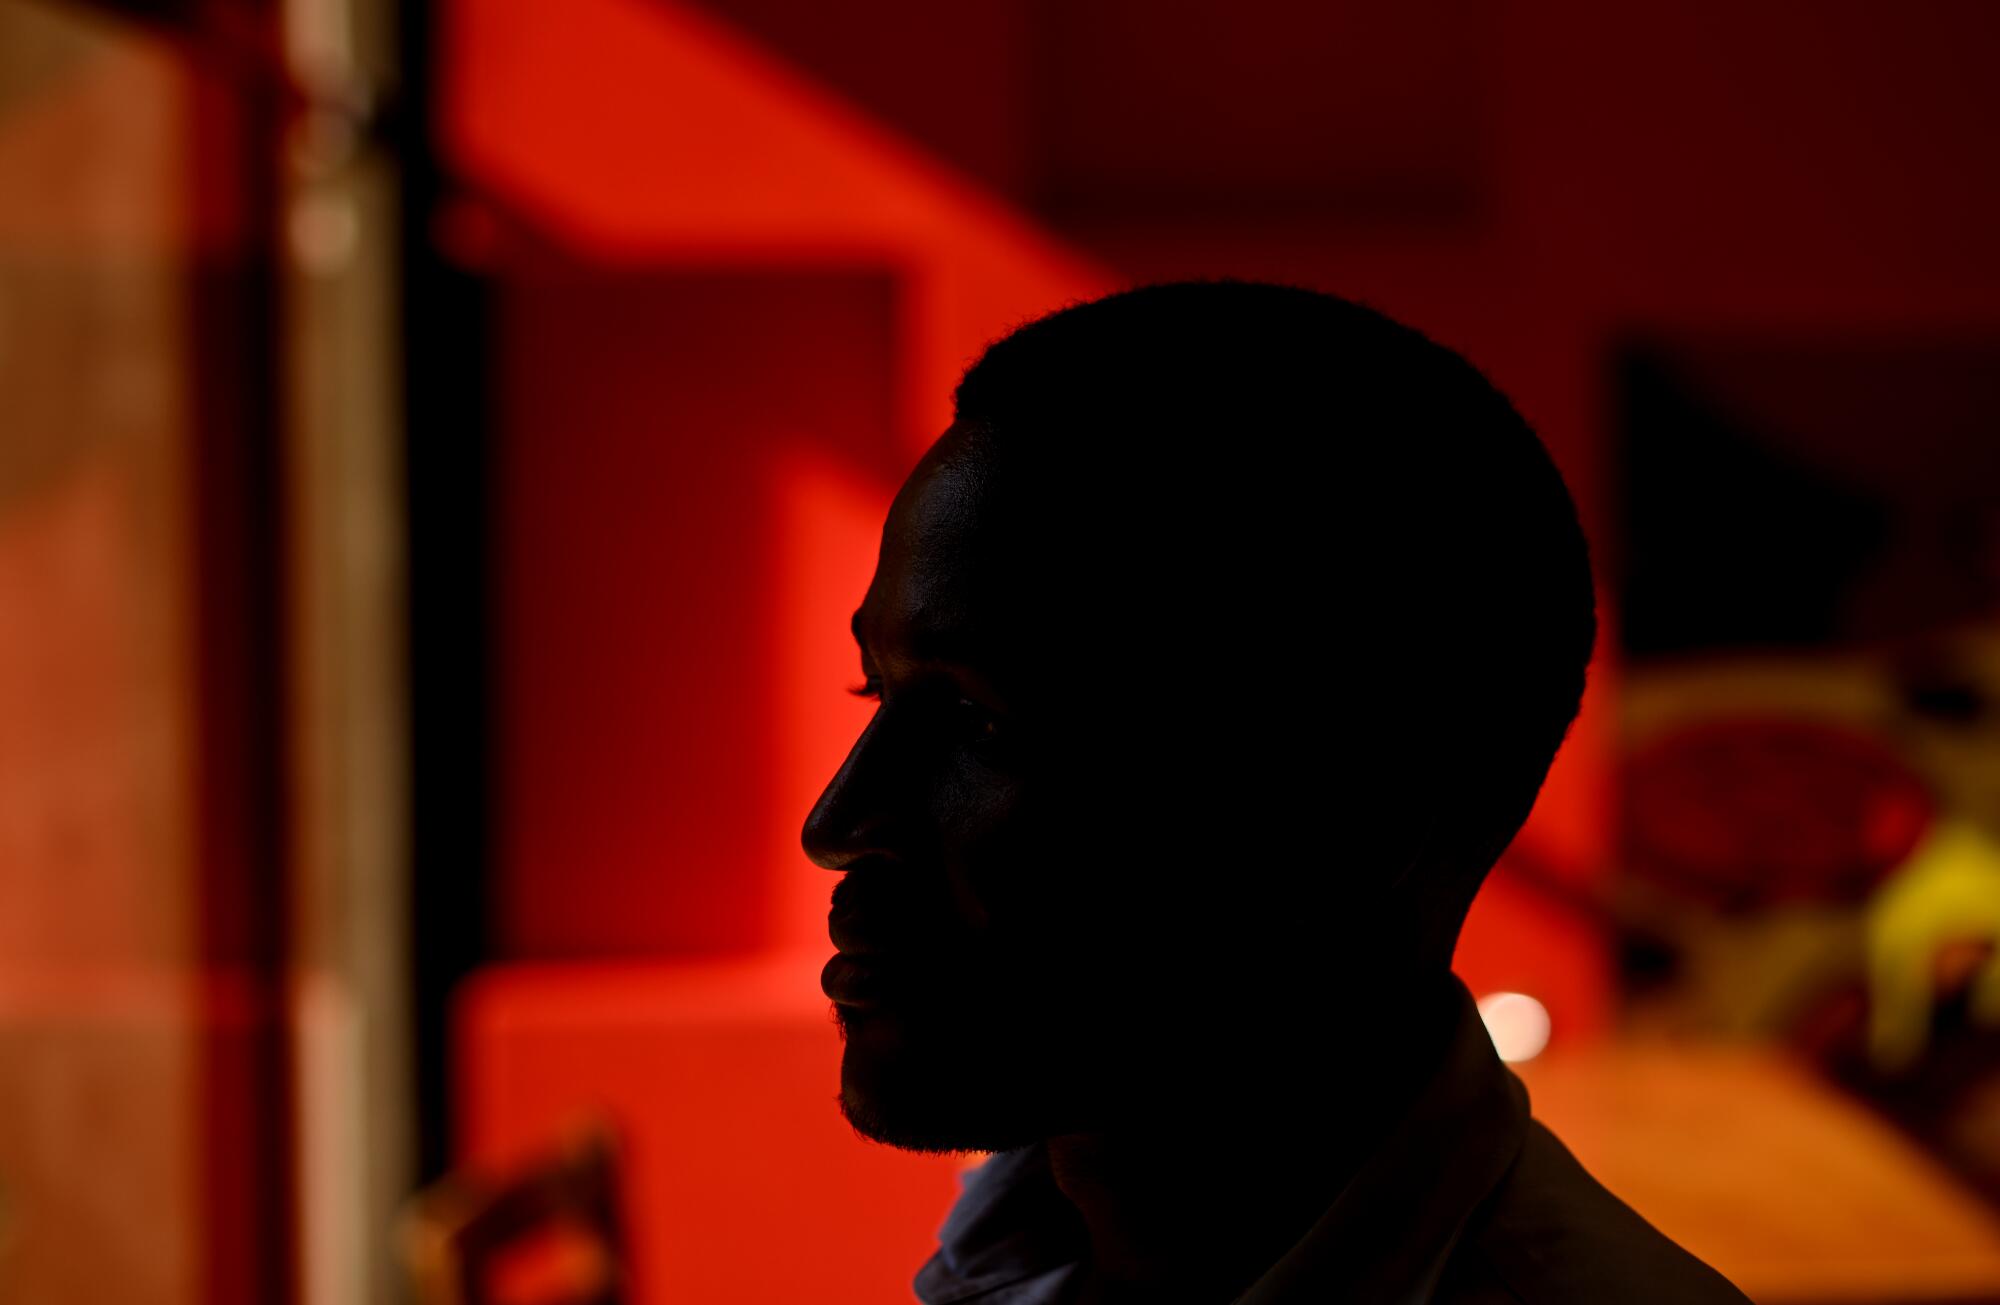 A man is shown in silhouette against a red background